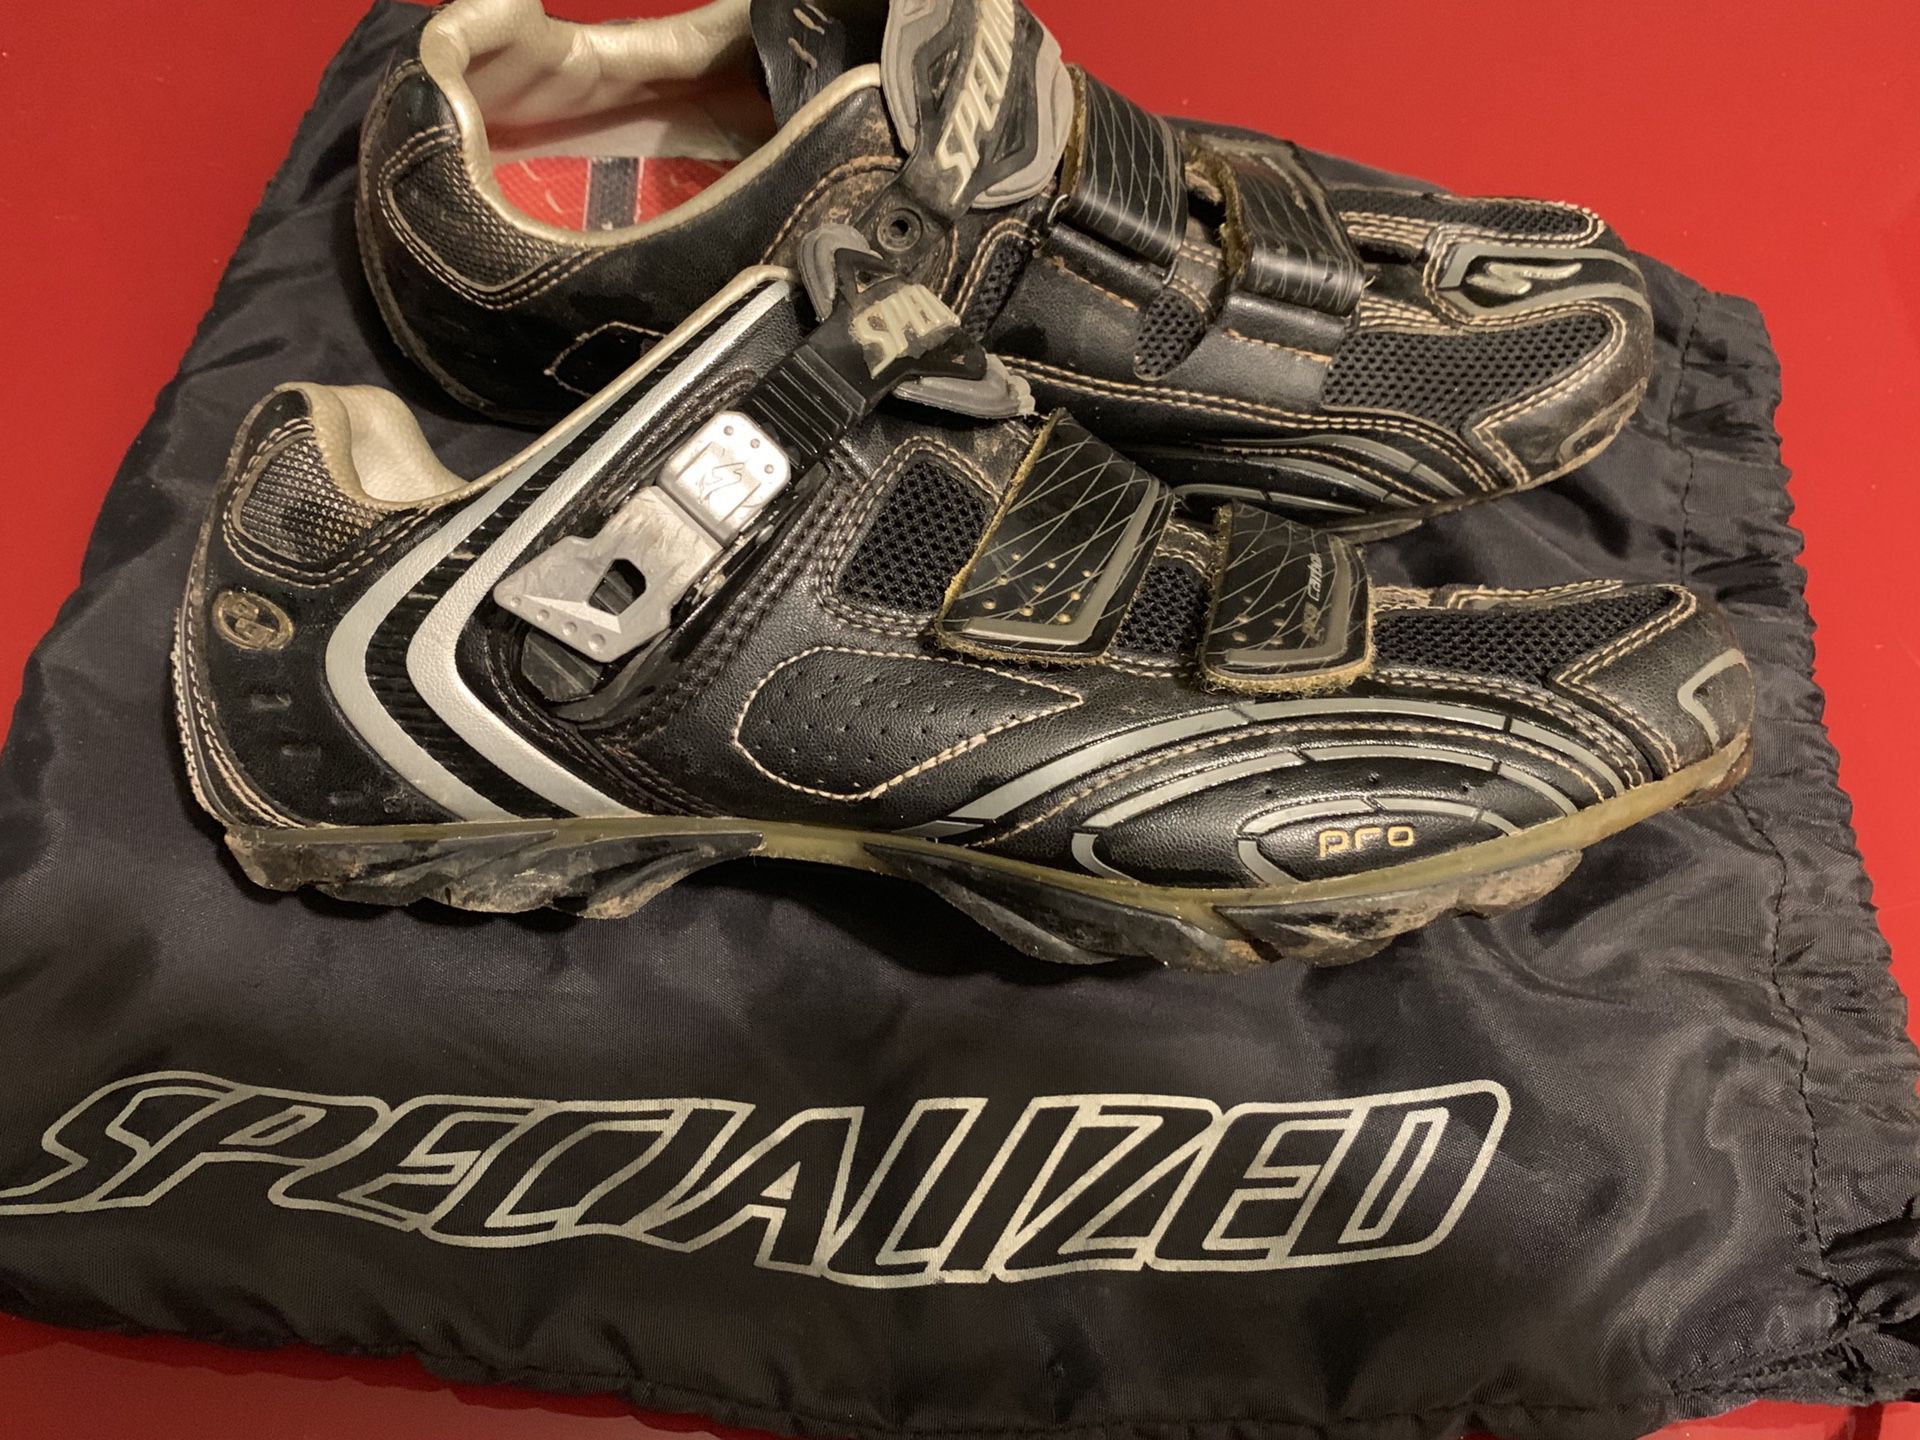 Specialized Carbon Pro MTB Men’s 10 and Shimano SPD-M540 pedal